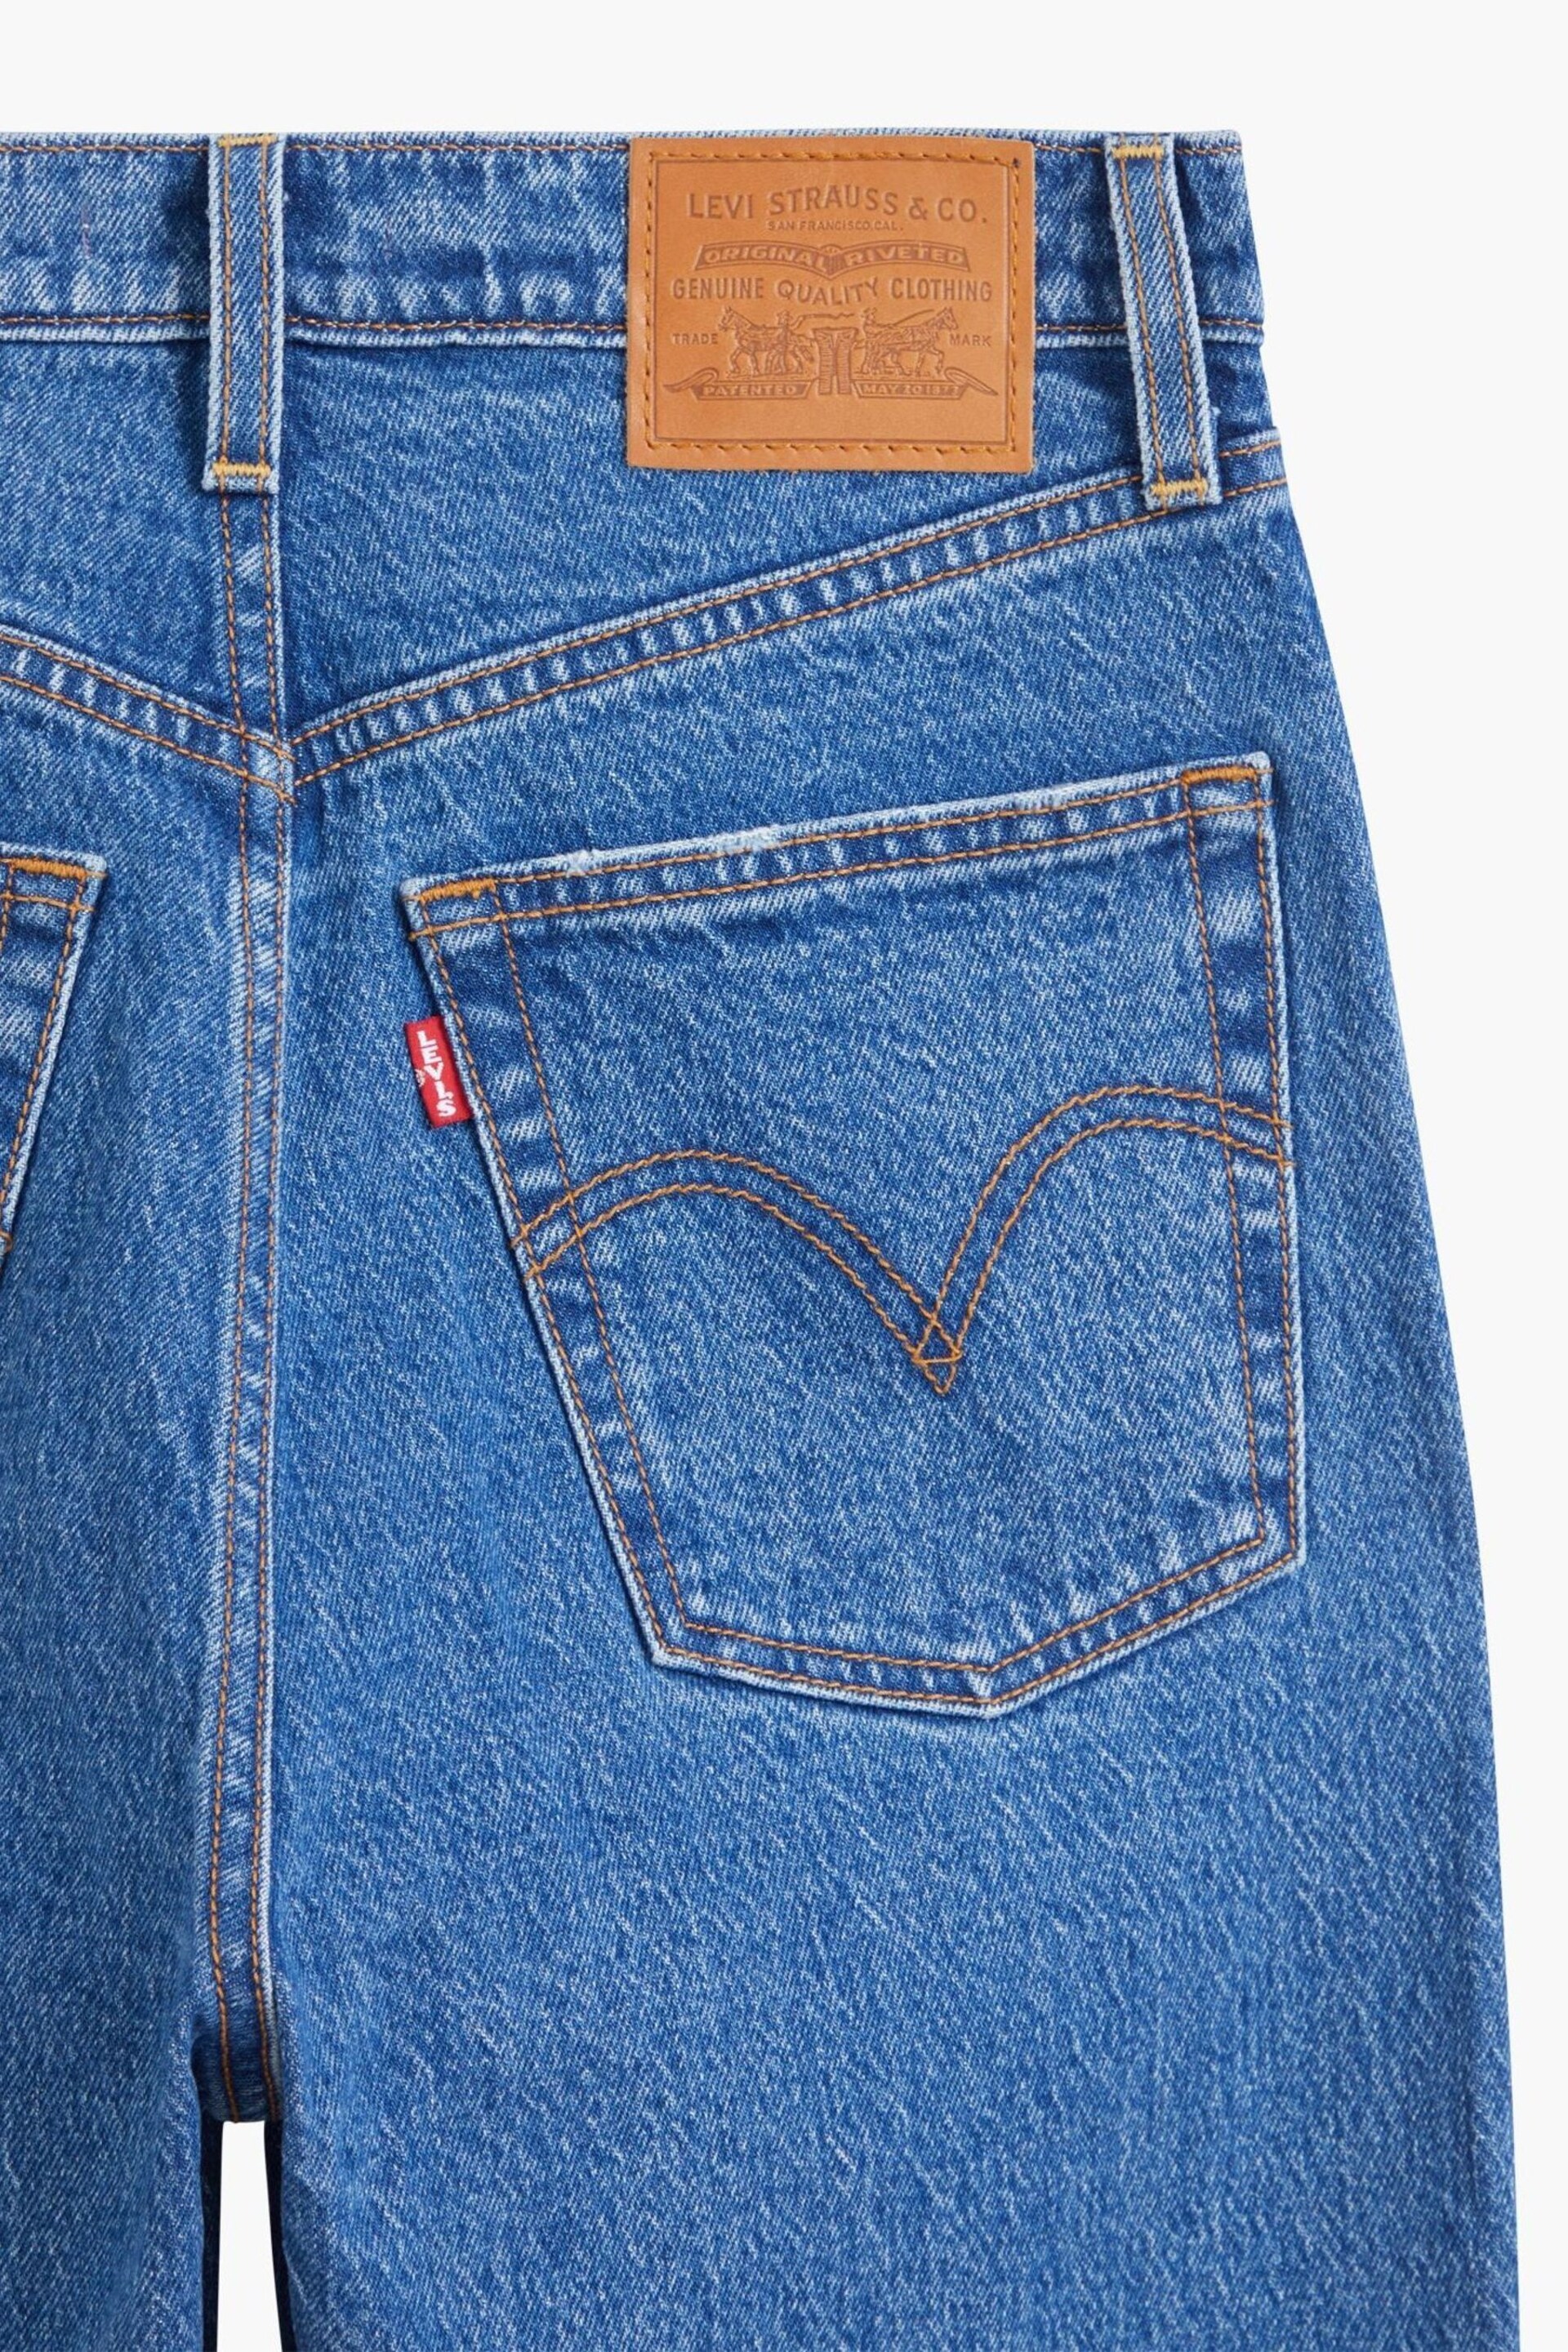 Levi's® Jazz Pop Ribcage Straight Ankle Jeans - Image 12 of 14